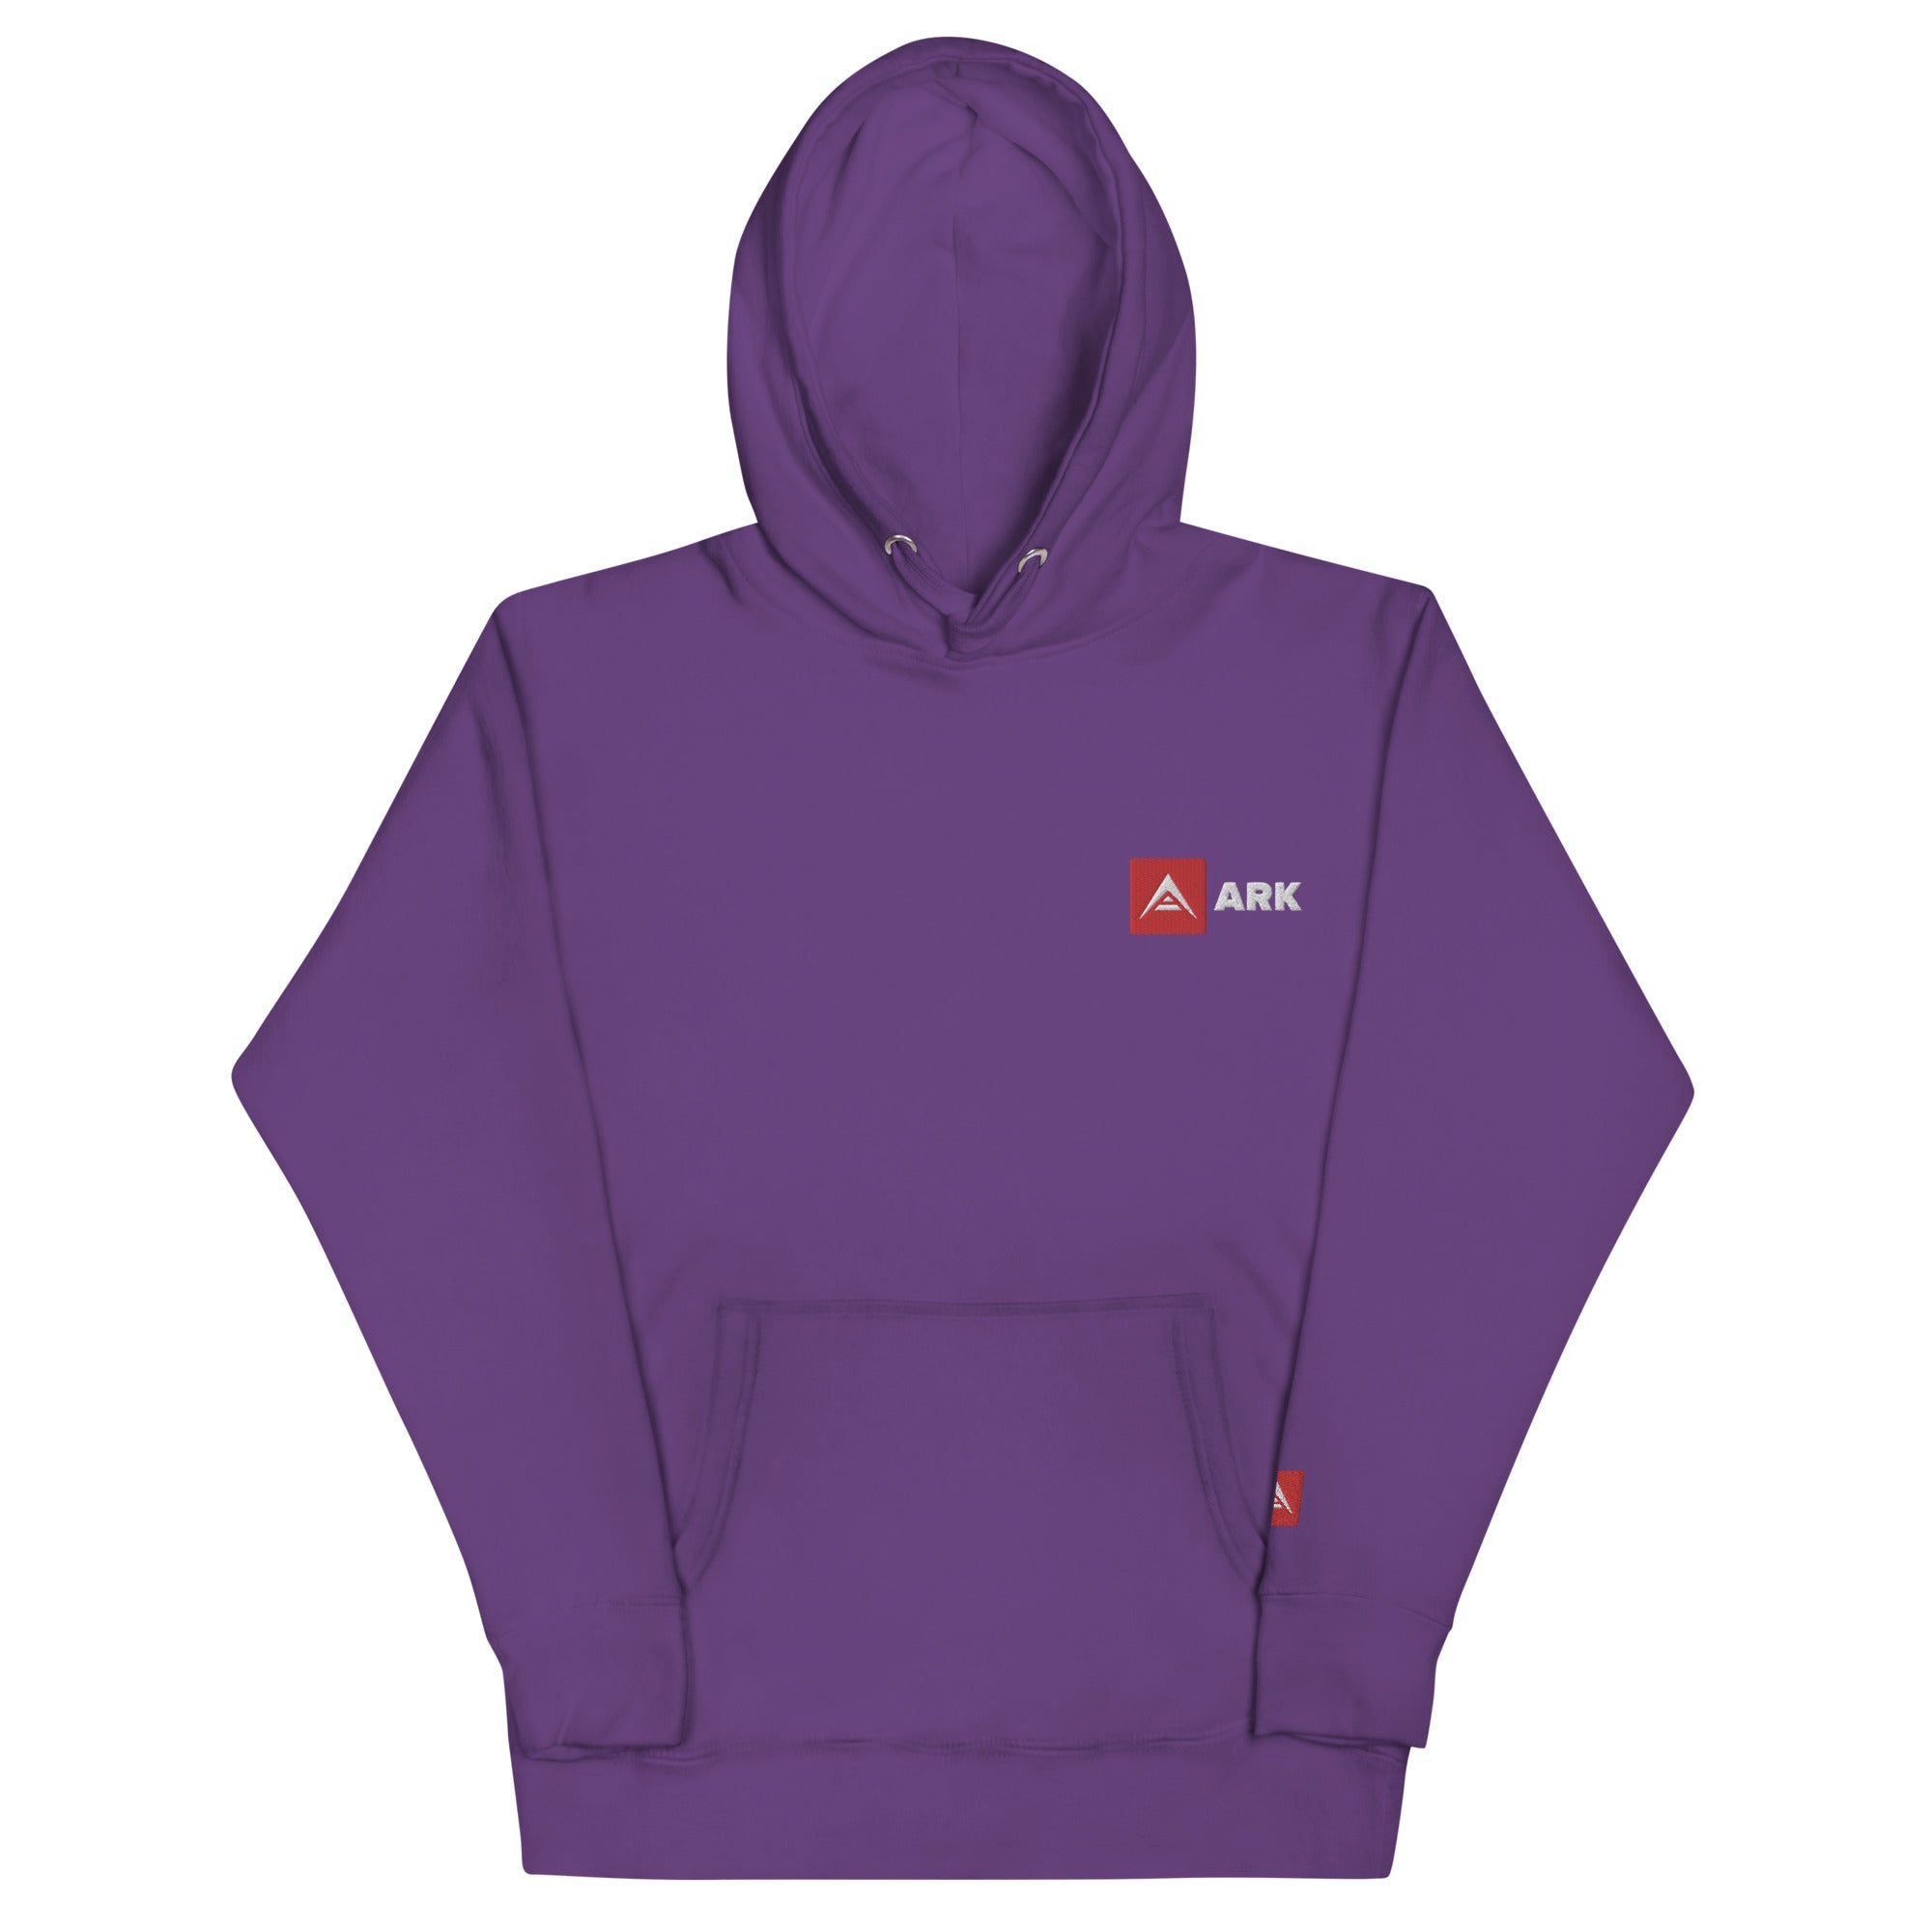 ARK Hoodie with white lettering